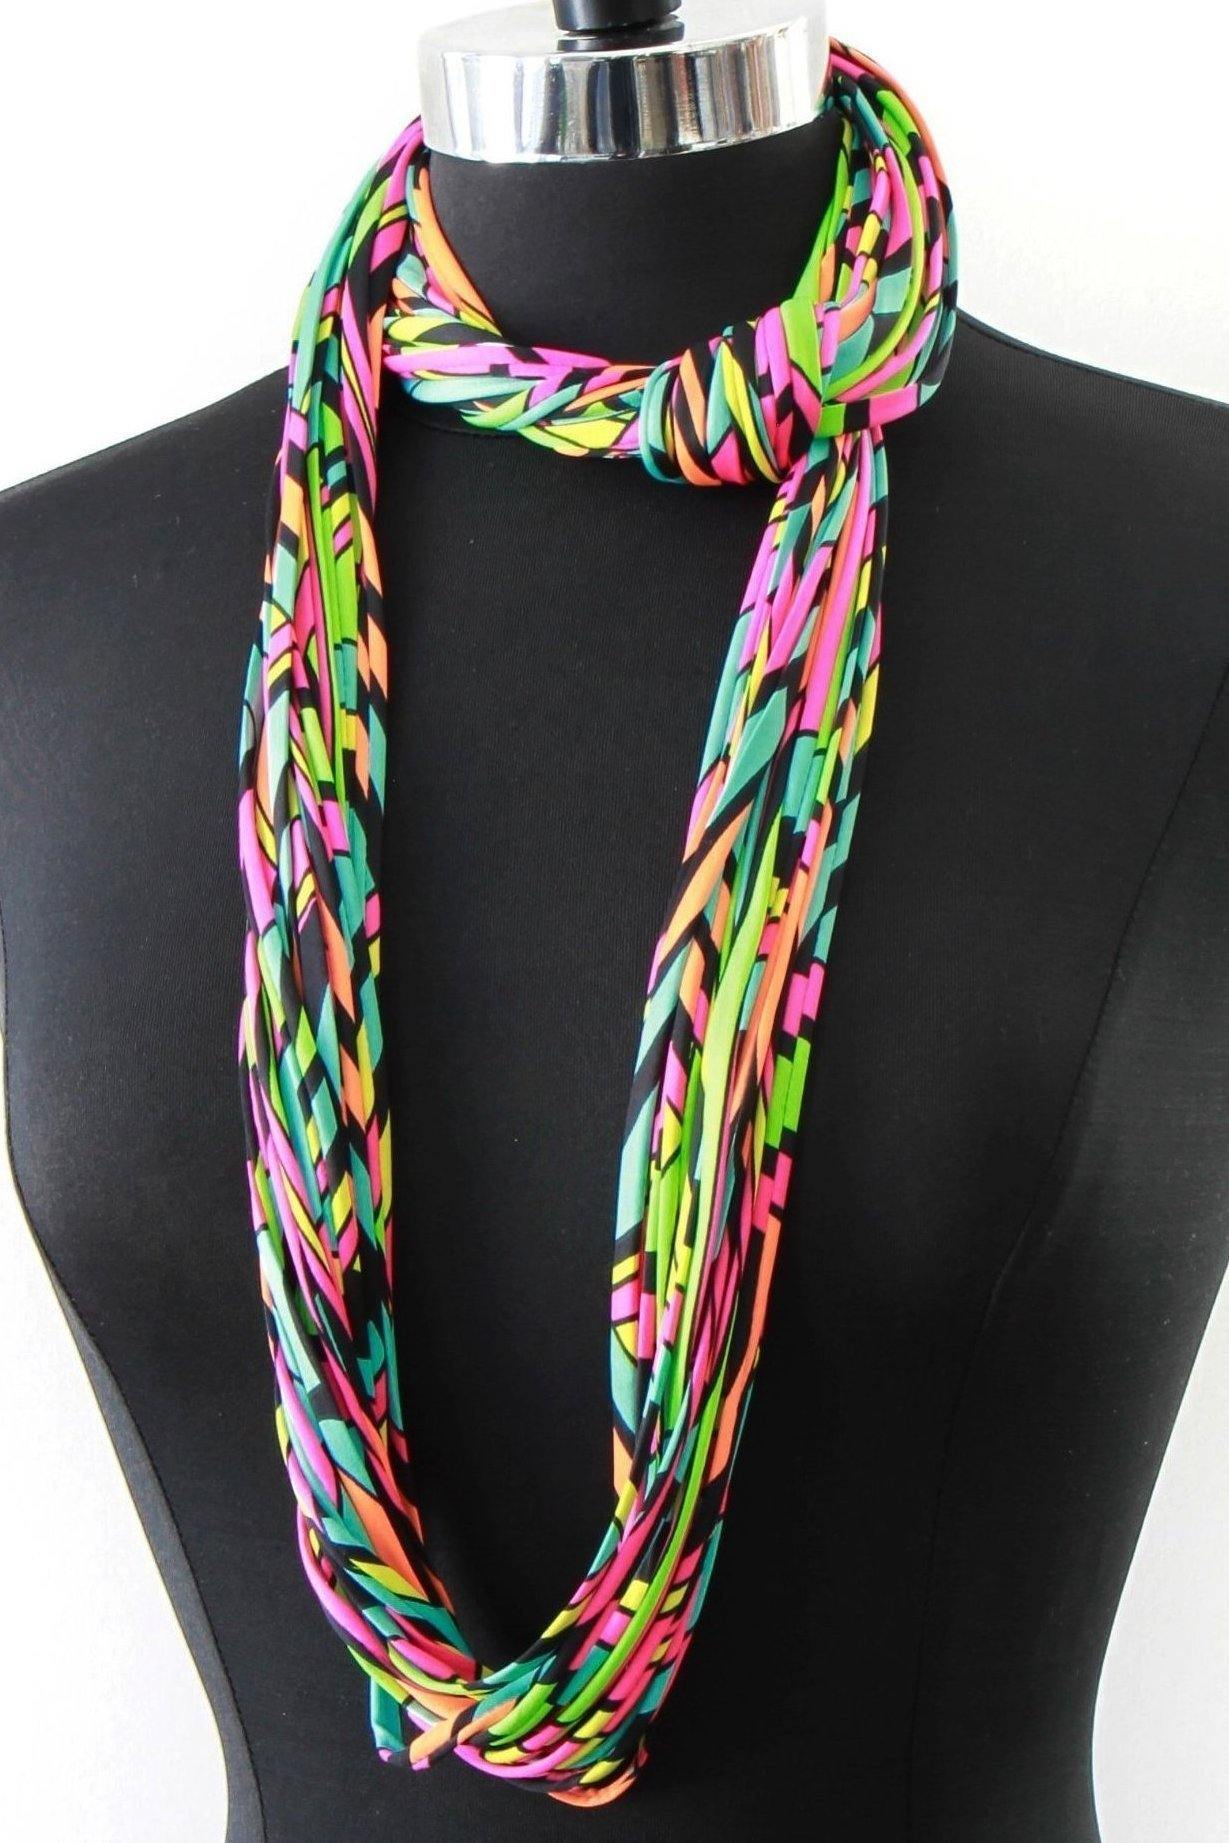 Handmade Neon Infinity Scarf Necklace, Scarf-lace, Not a tshirt Scarf for Women or Teens